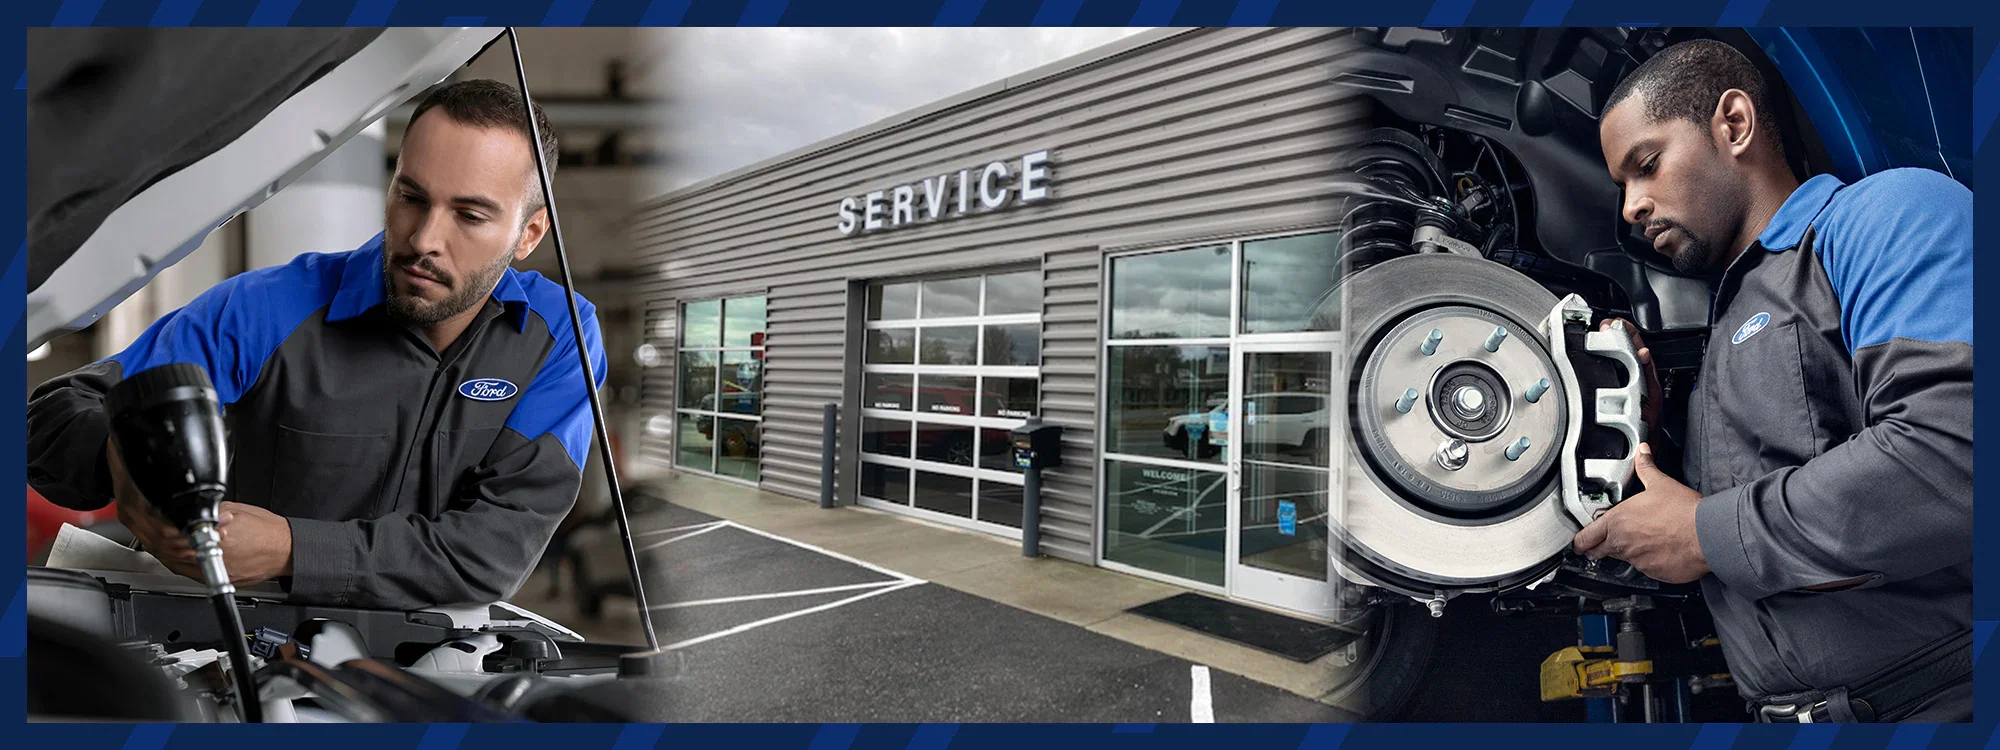 Why Buy | Aschenbach Ford in Wytheville VA